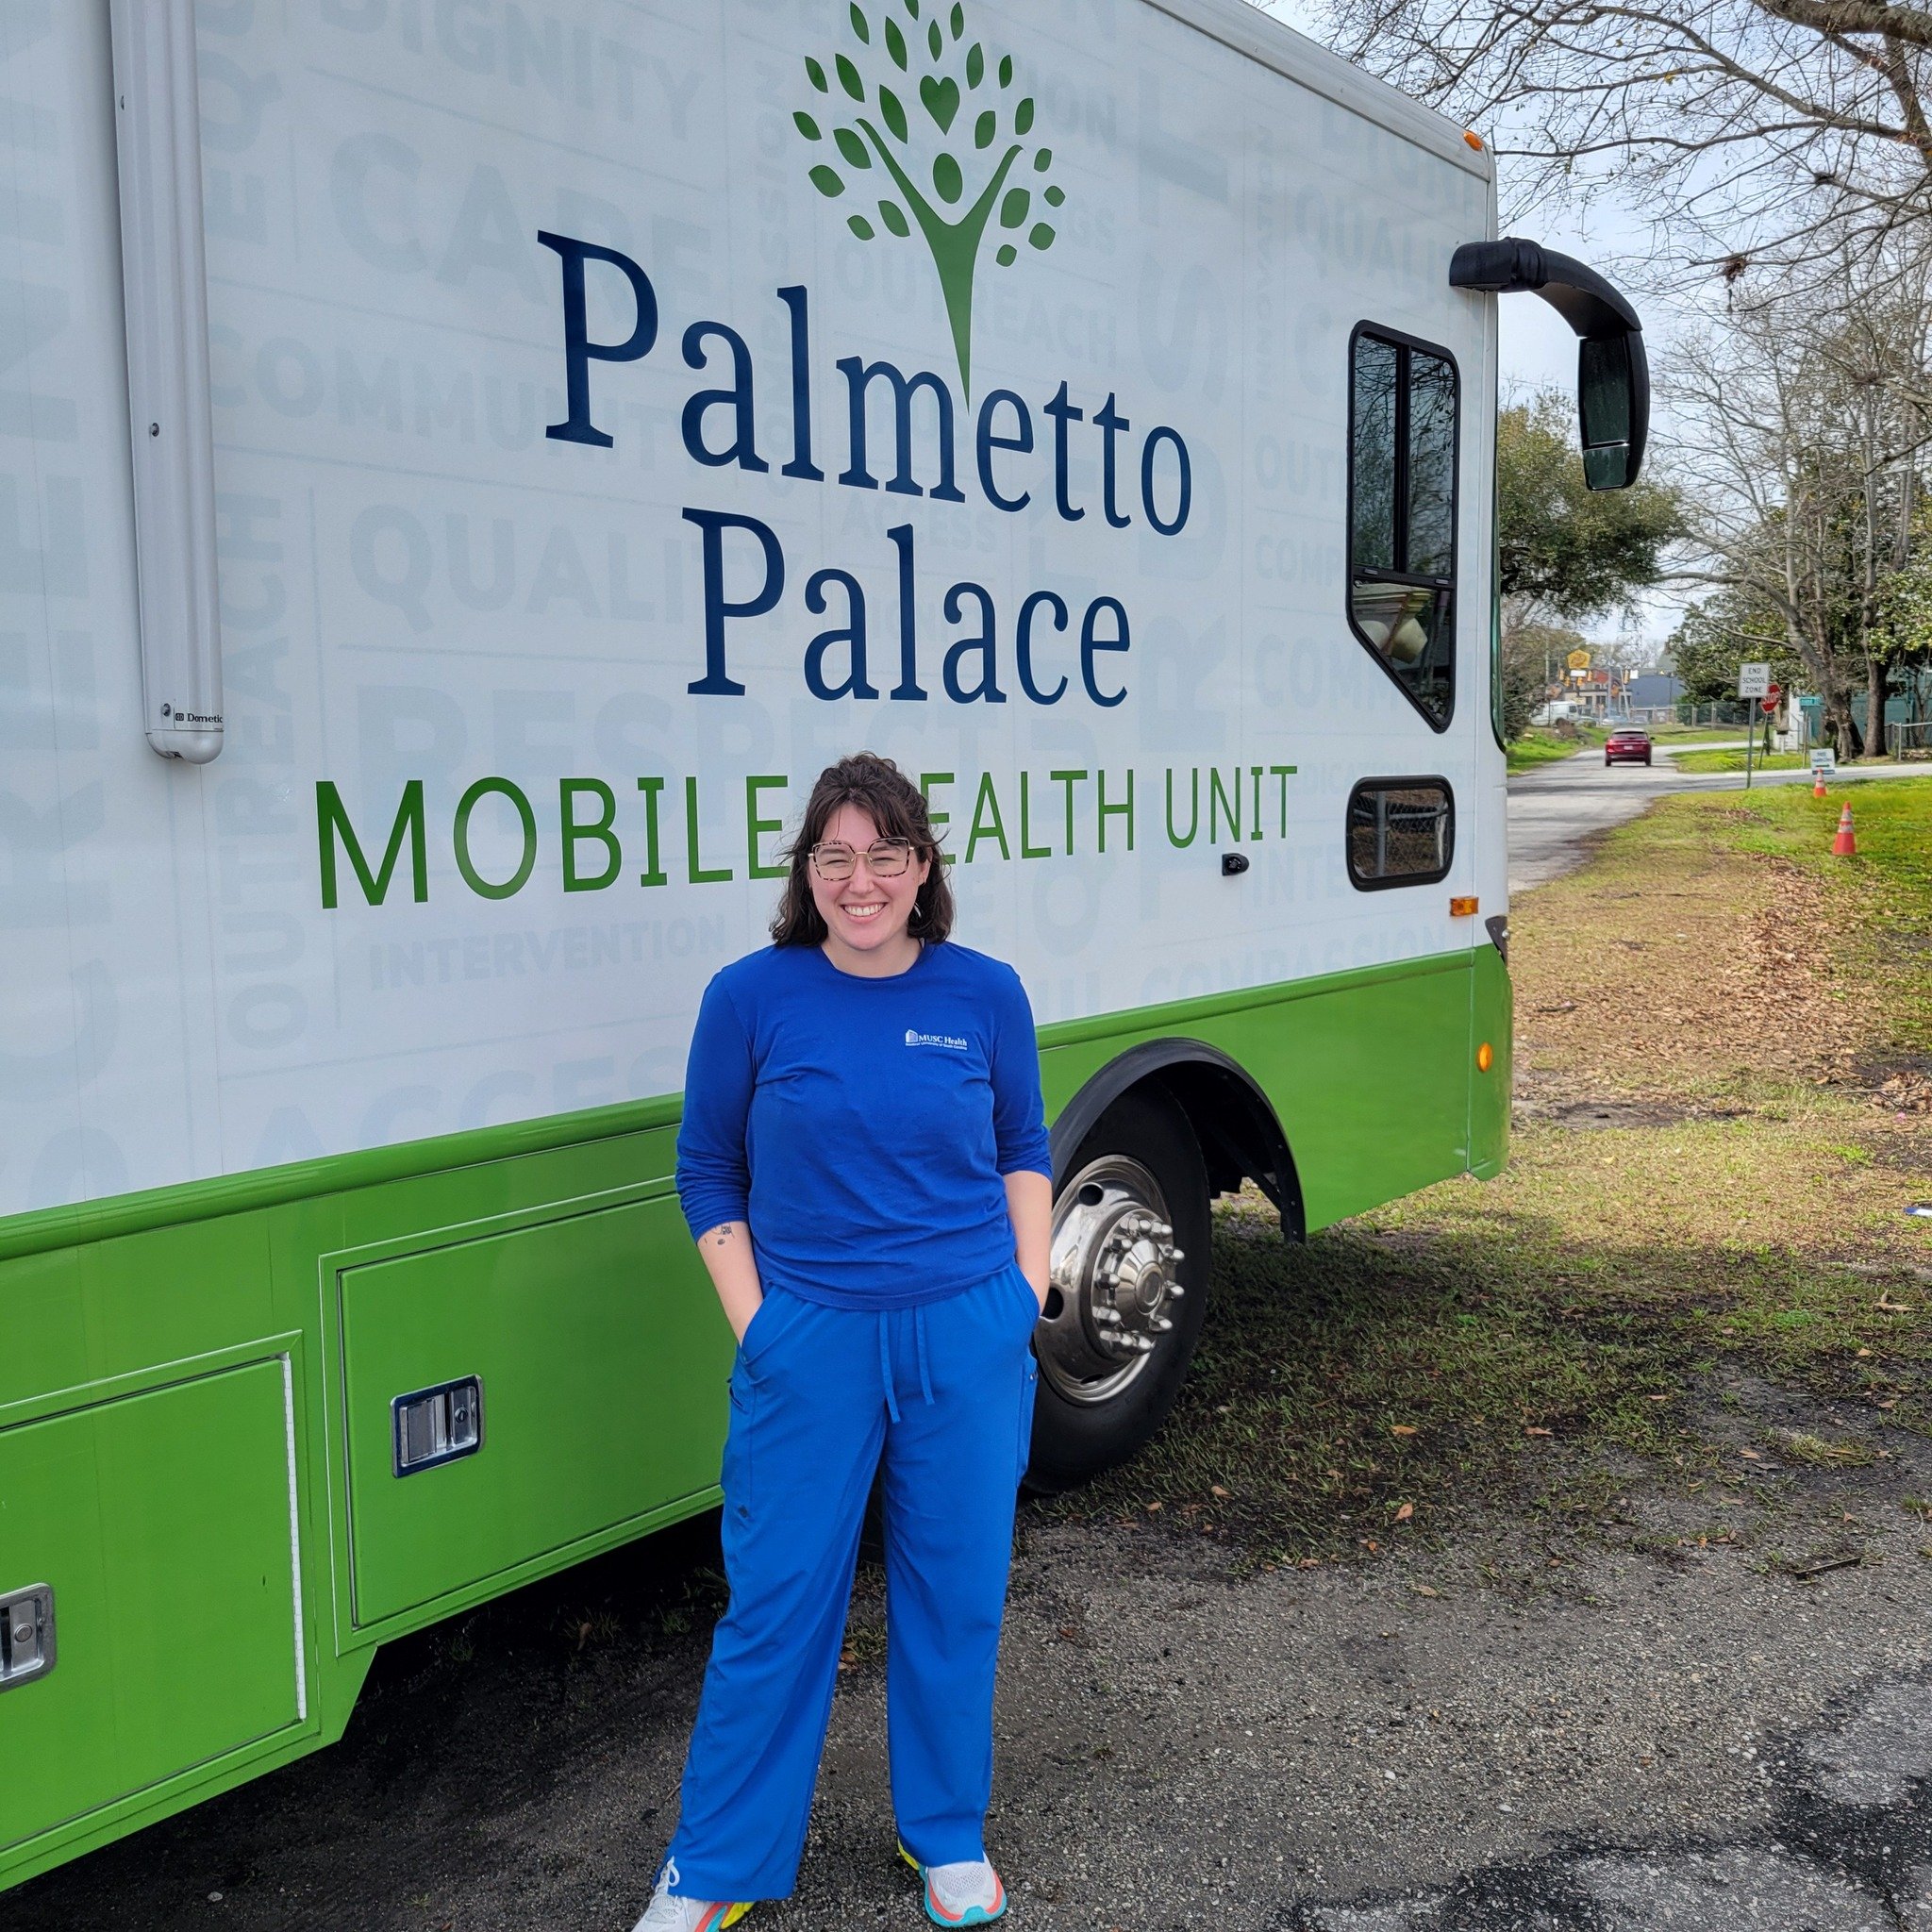 We love getting to know the Palmetto Palace team 🌴! Meet Nancy Sterrett, RN, who helps patients through our mobile health unit.

When Nurse Sterrett isn't working she enjoys painting, thrifting, photography and cooking. Thanks Nancy, for all that yo